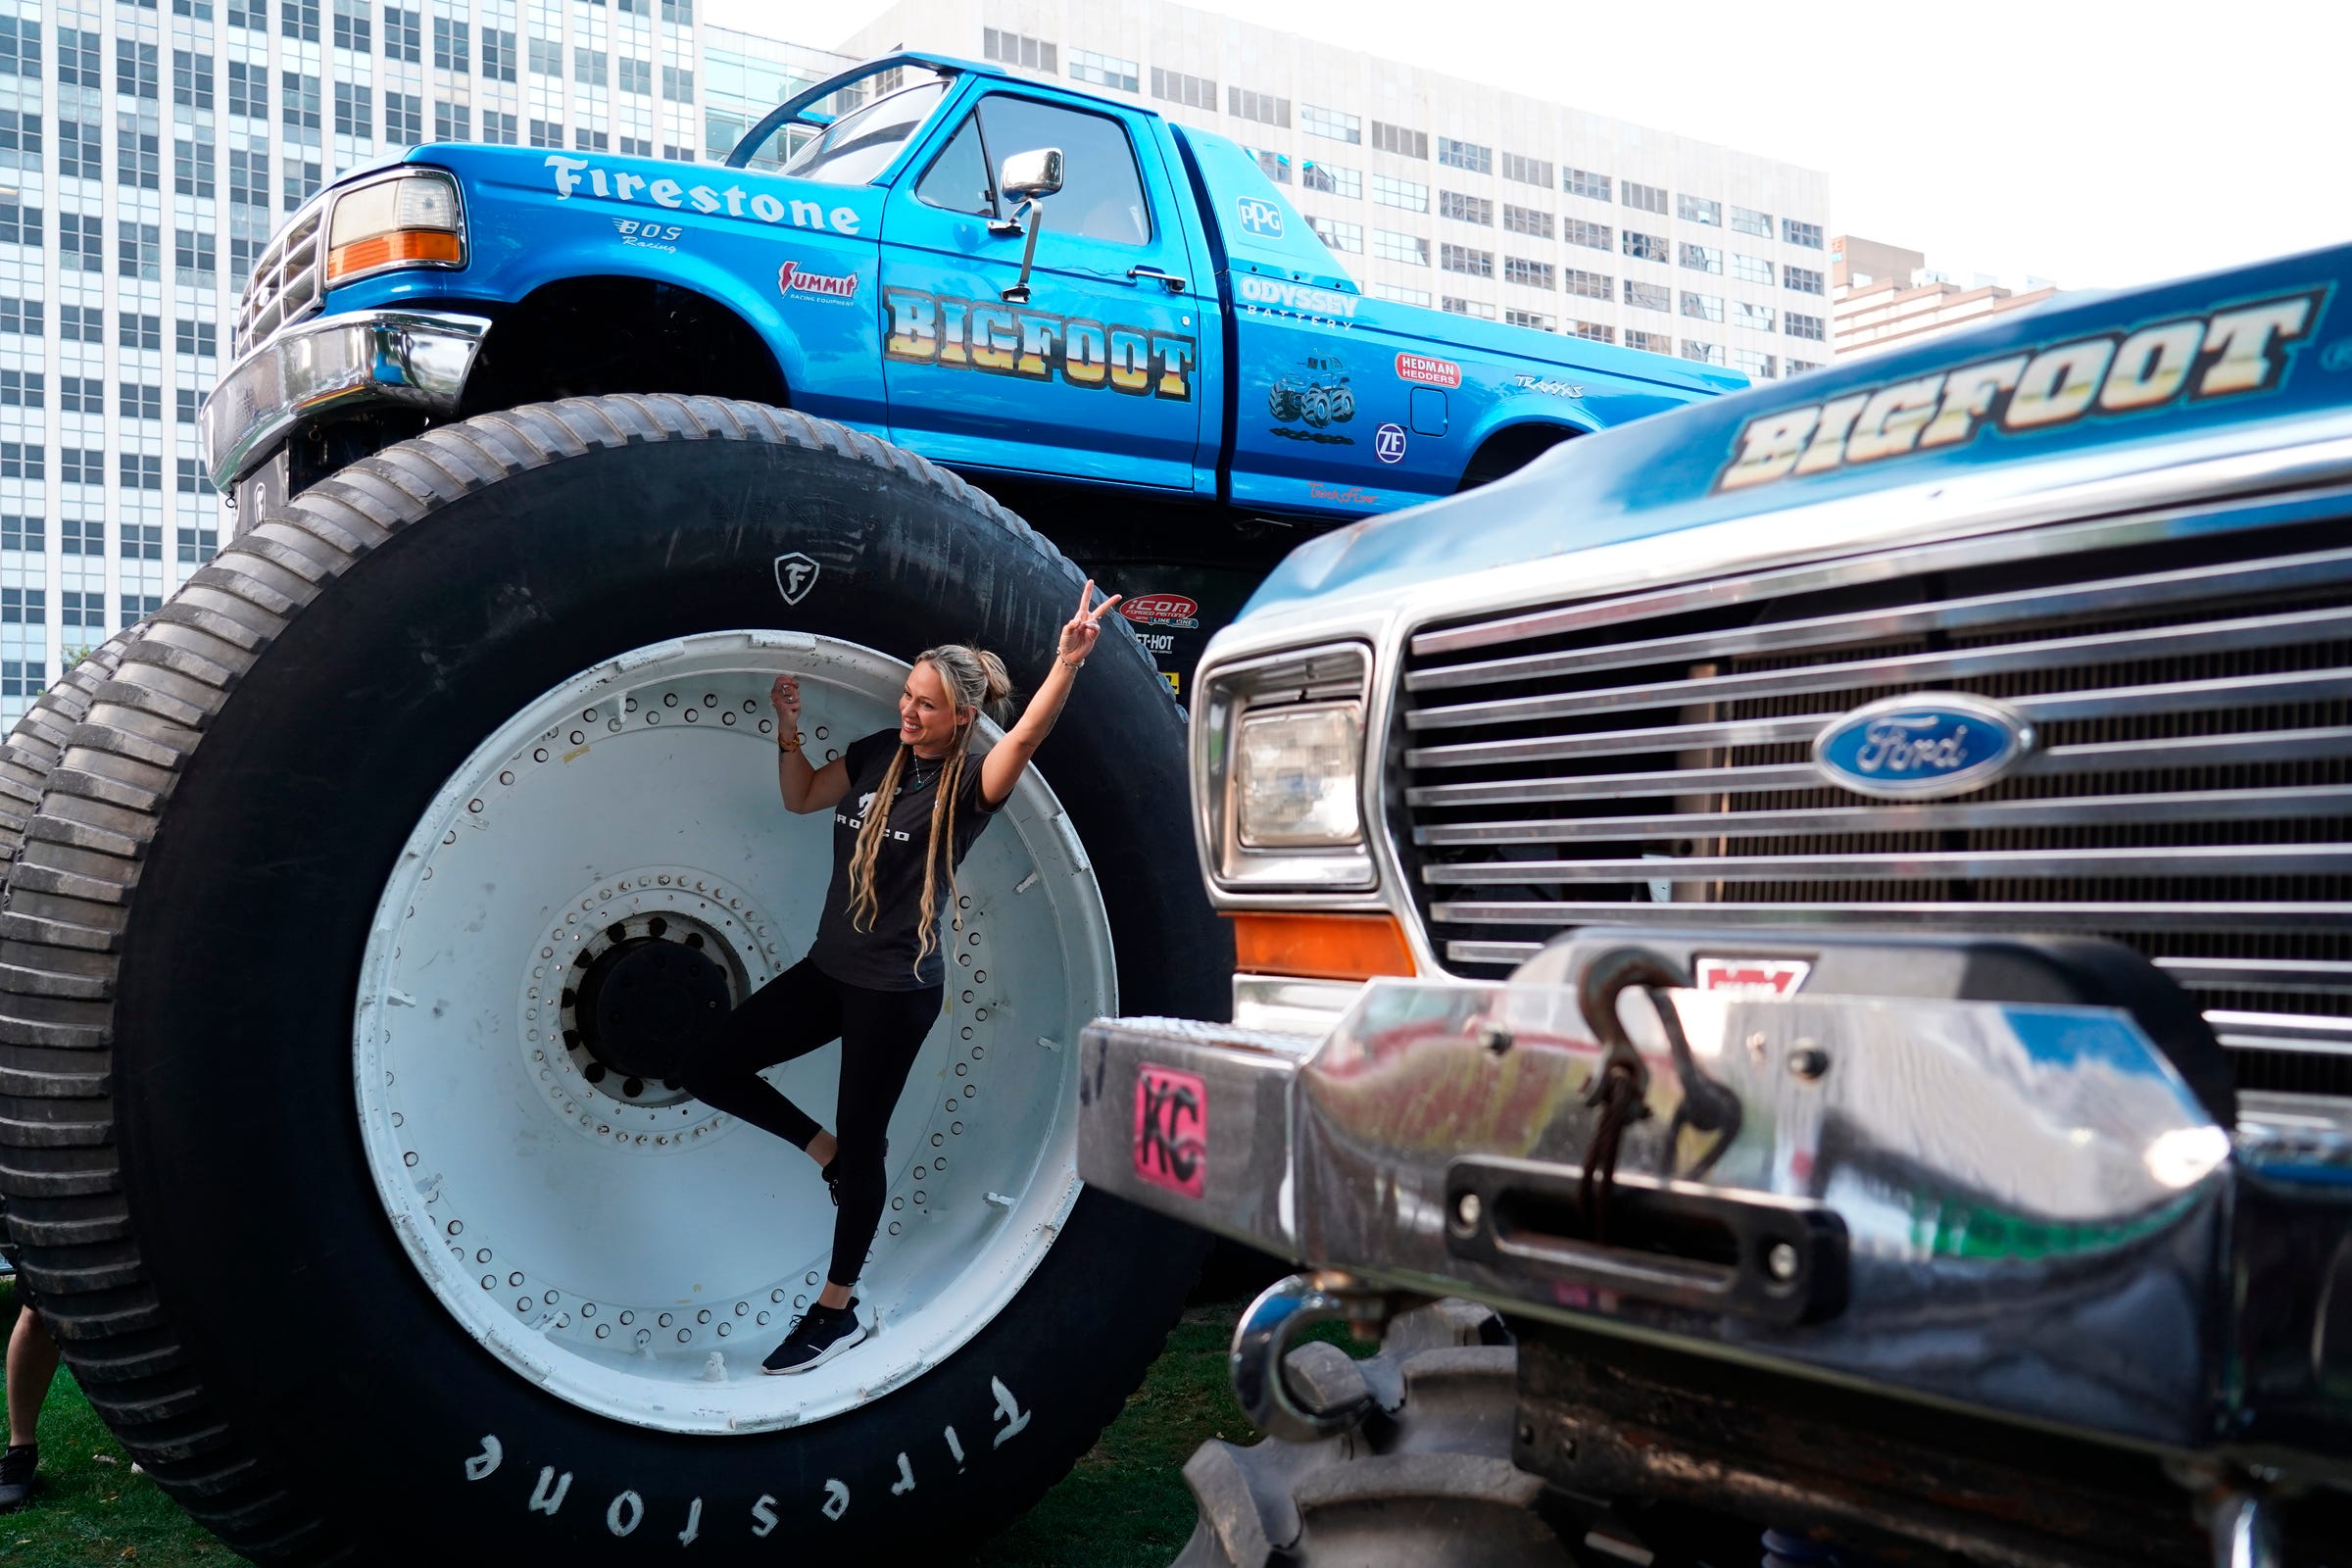 Yolo Freeman of Montezuma, Iowa, stands inside a tire of Bigfoot truck during the Ford pre-show event as part of the 2022 North American International Auto Show held at Hart Plaza in downtown Detroit on Wednesday, Sept. 14, 2022.